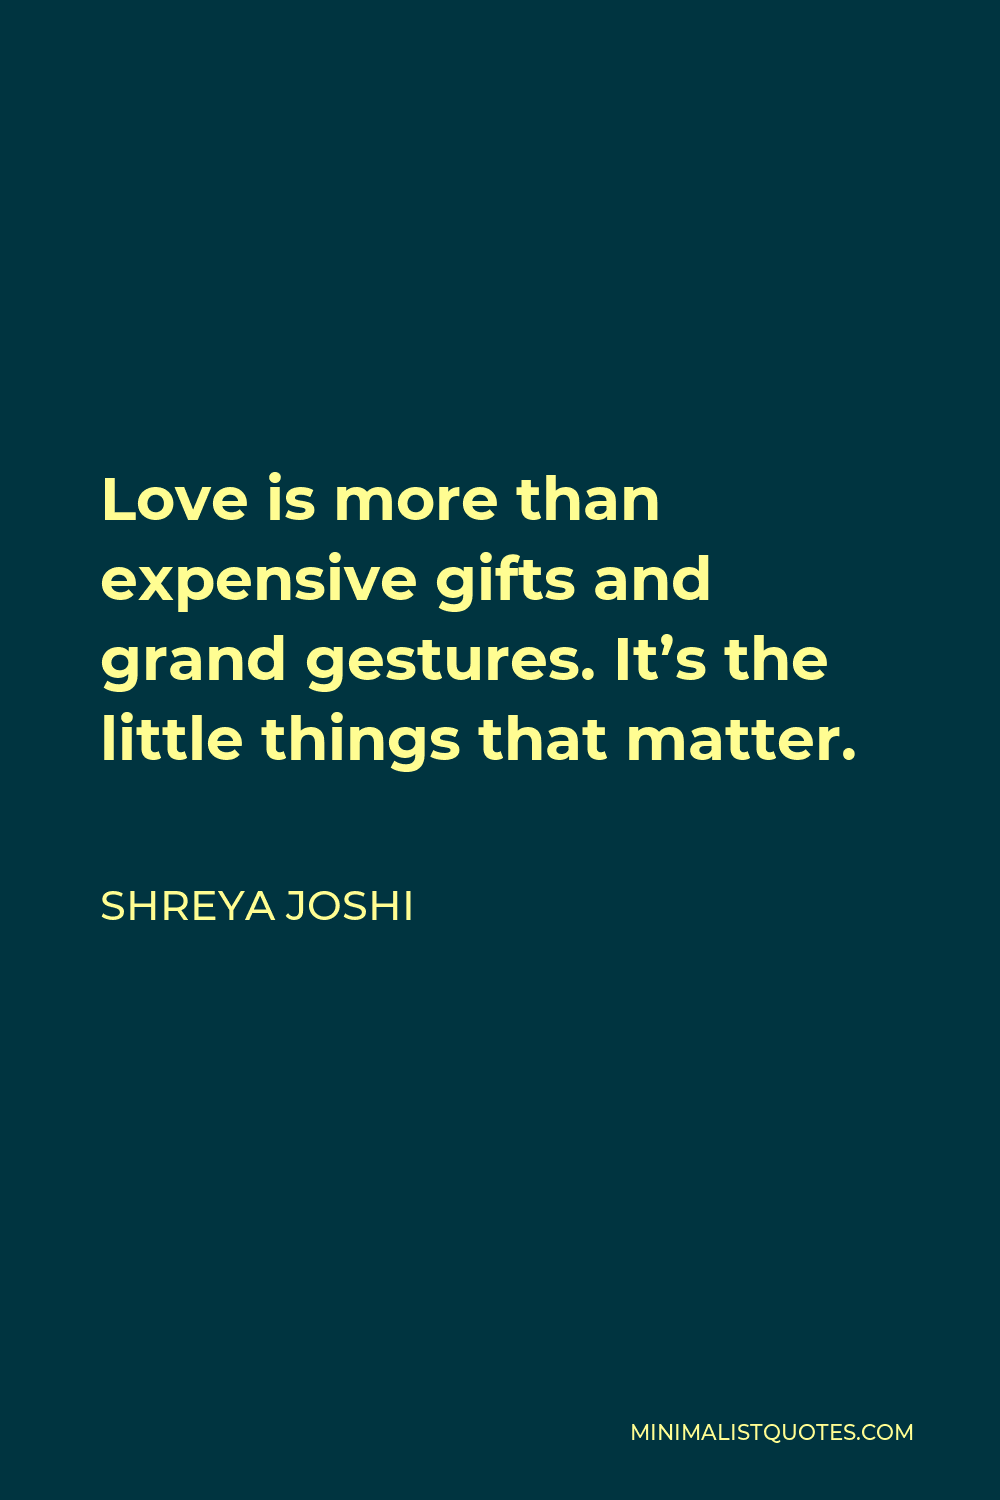 Shreya Joshi Quote - Love is more than expensive gifts and grand gestures. It’s the little things that matter.